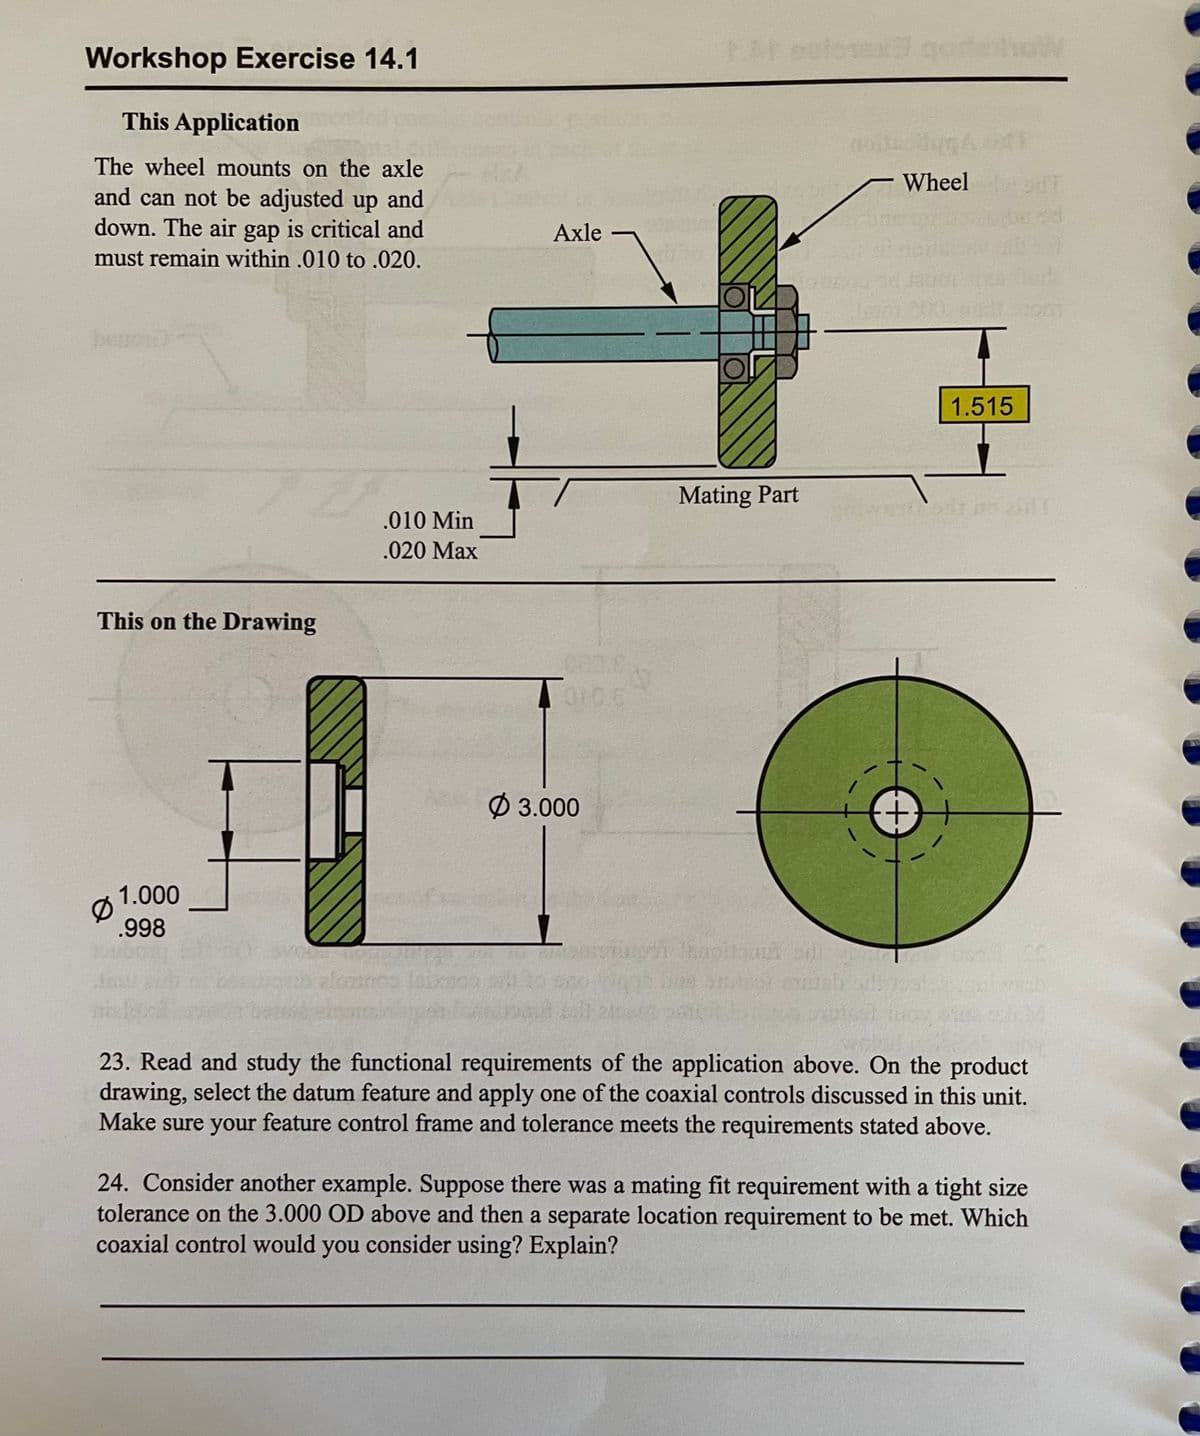 Workshop Exercise 14.1
1 estorex goroW
This Application
The wheel mounts on the axle
Wheel
and can not be adjusted up and
down. The air gap is critical and
must remain within .010 to .020.
Axle
1.515
Mating Part
.010 Min
.020 Max
This on the Drawing
Ø 3.000
1.000
.998
23. Read and study the functional requirements of the application above. On the product
drawing, select the datum feature and apply one of the coaxial controls discussed in this unit.
Make sure your feature control frame and tolerance meets the requirements stated above.
24. Consider another example. Suppose there was a mating fit requirement with a tight size
tolerance on the 3.000 OD above and then a separate location requirement to be met. Which
coaxial control would you consider using? Explain?
